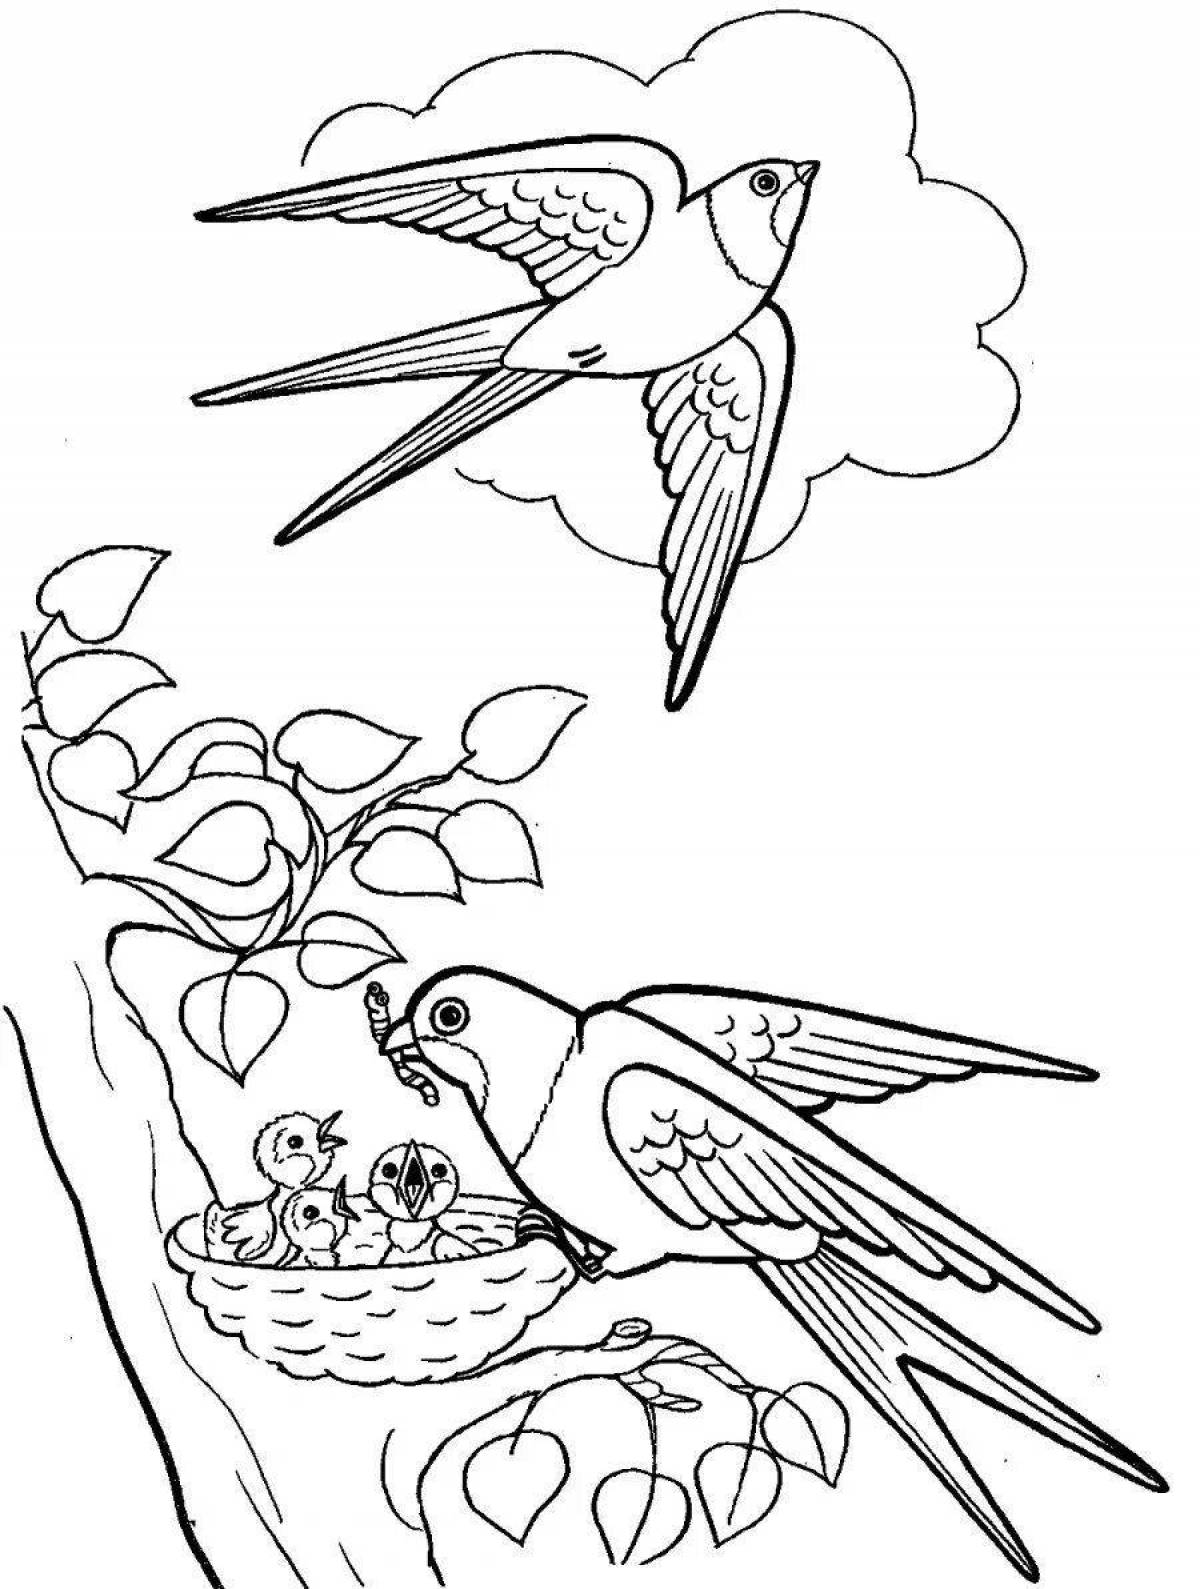 Joyful migratory birds coloring pages for kids